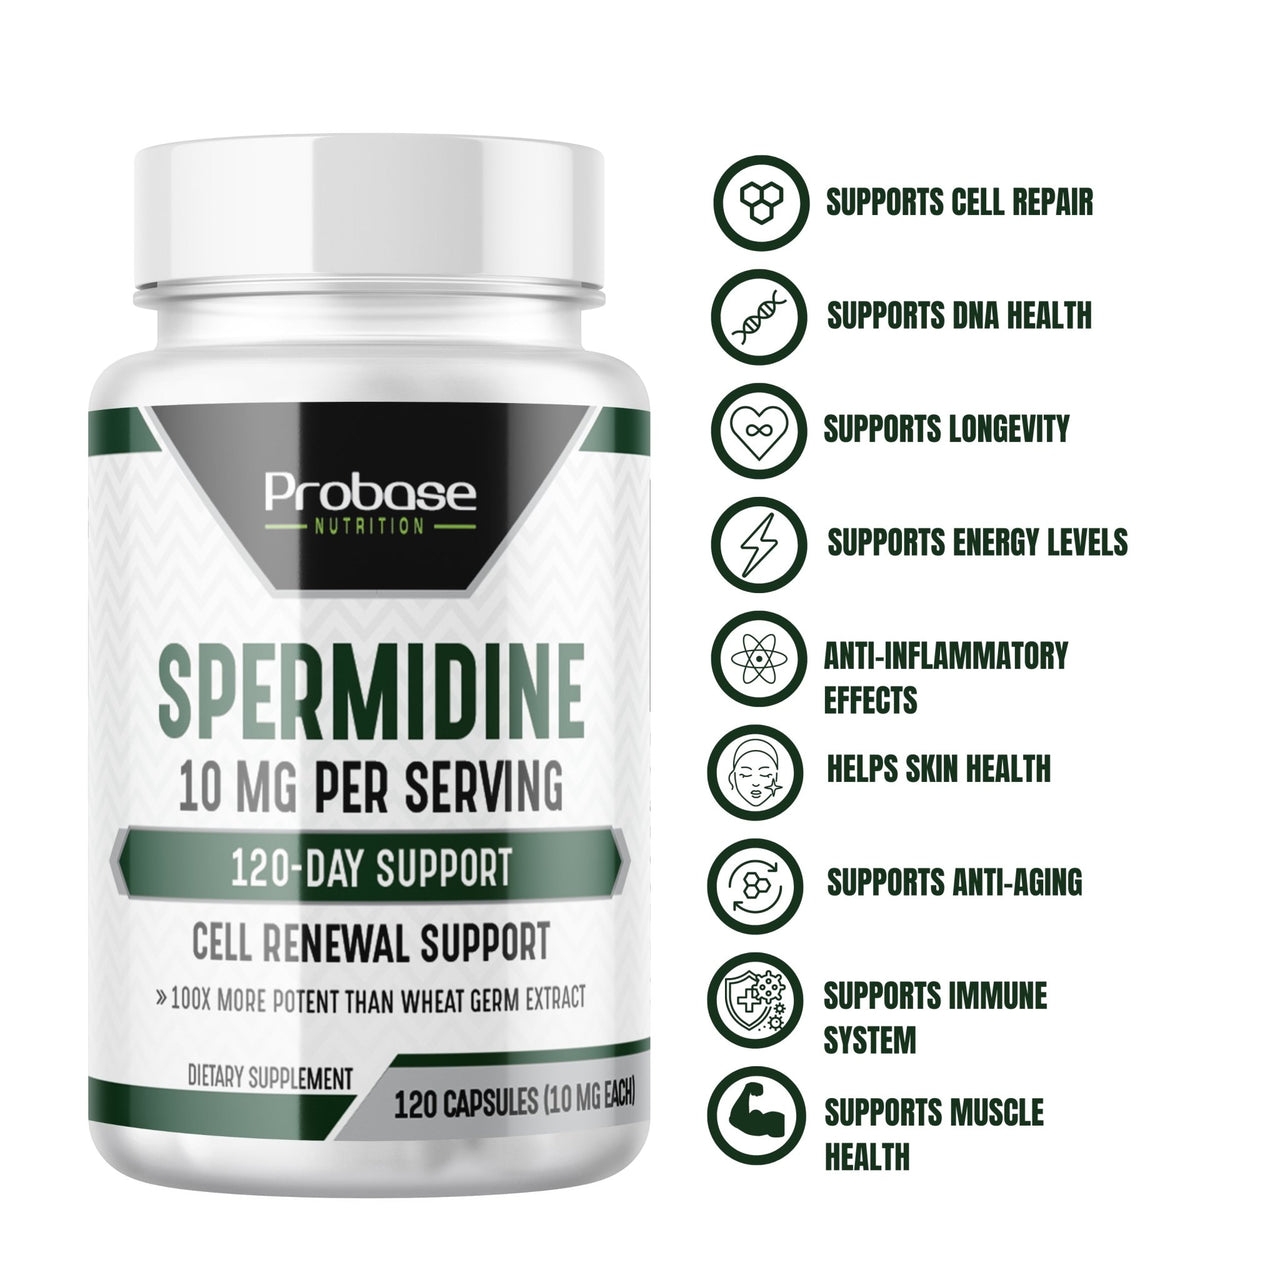 Probase Spermidine Supplement (10mg of 99% Spermidine 3HCL - Third Party Tested) 120 Capsules - Over 100x More Potent Than Wheat Germ Extract for Cell Membrane, Telomere Health and Aging - Probase Nutrition